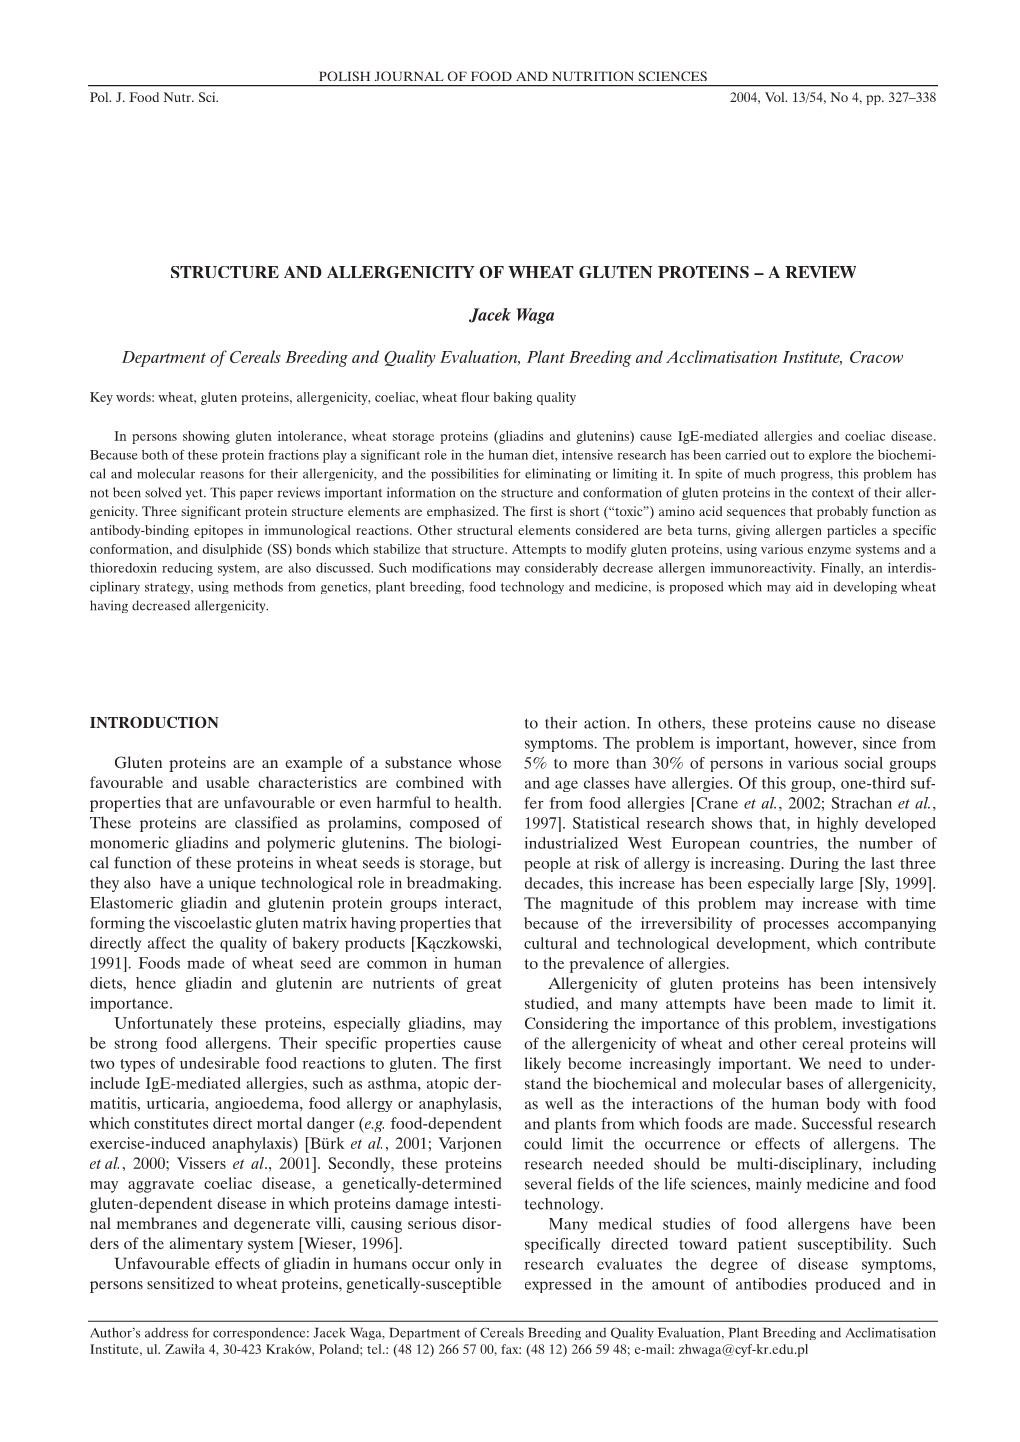 Structure and Allergenicity of Wheat Gluten Proteins – a Review